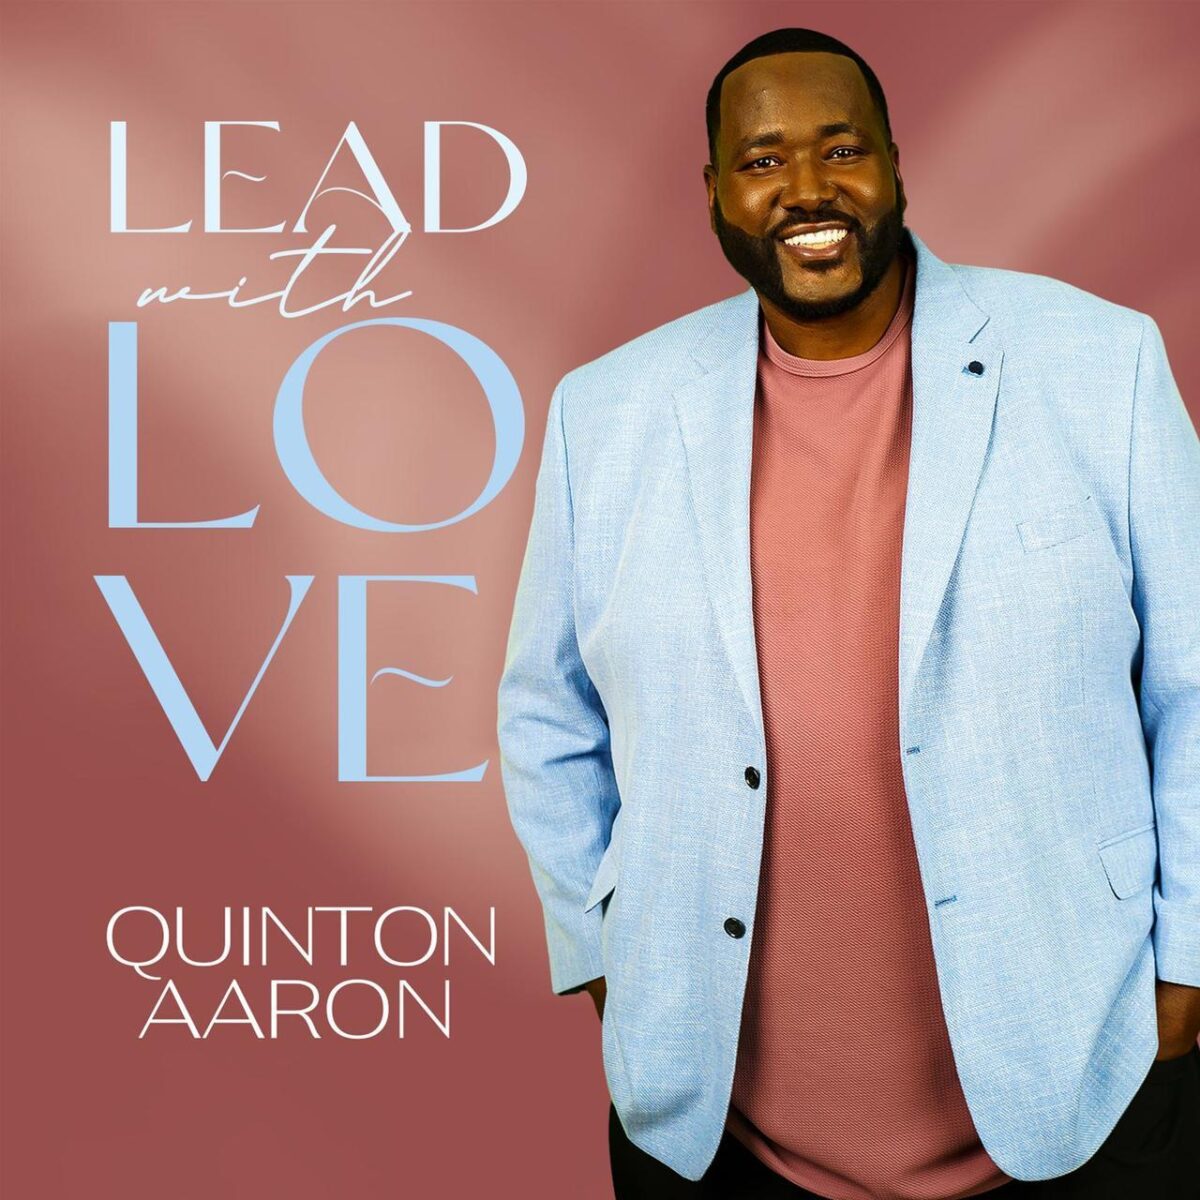 actor-quinton-aaron-releases-debut-single-“lead-with-love”